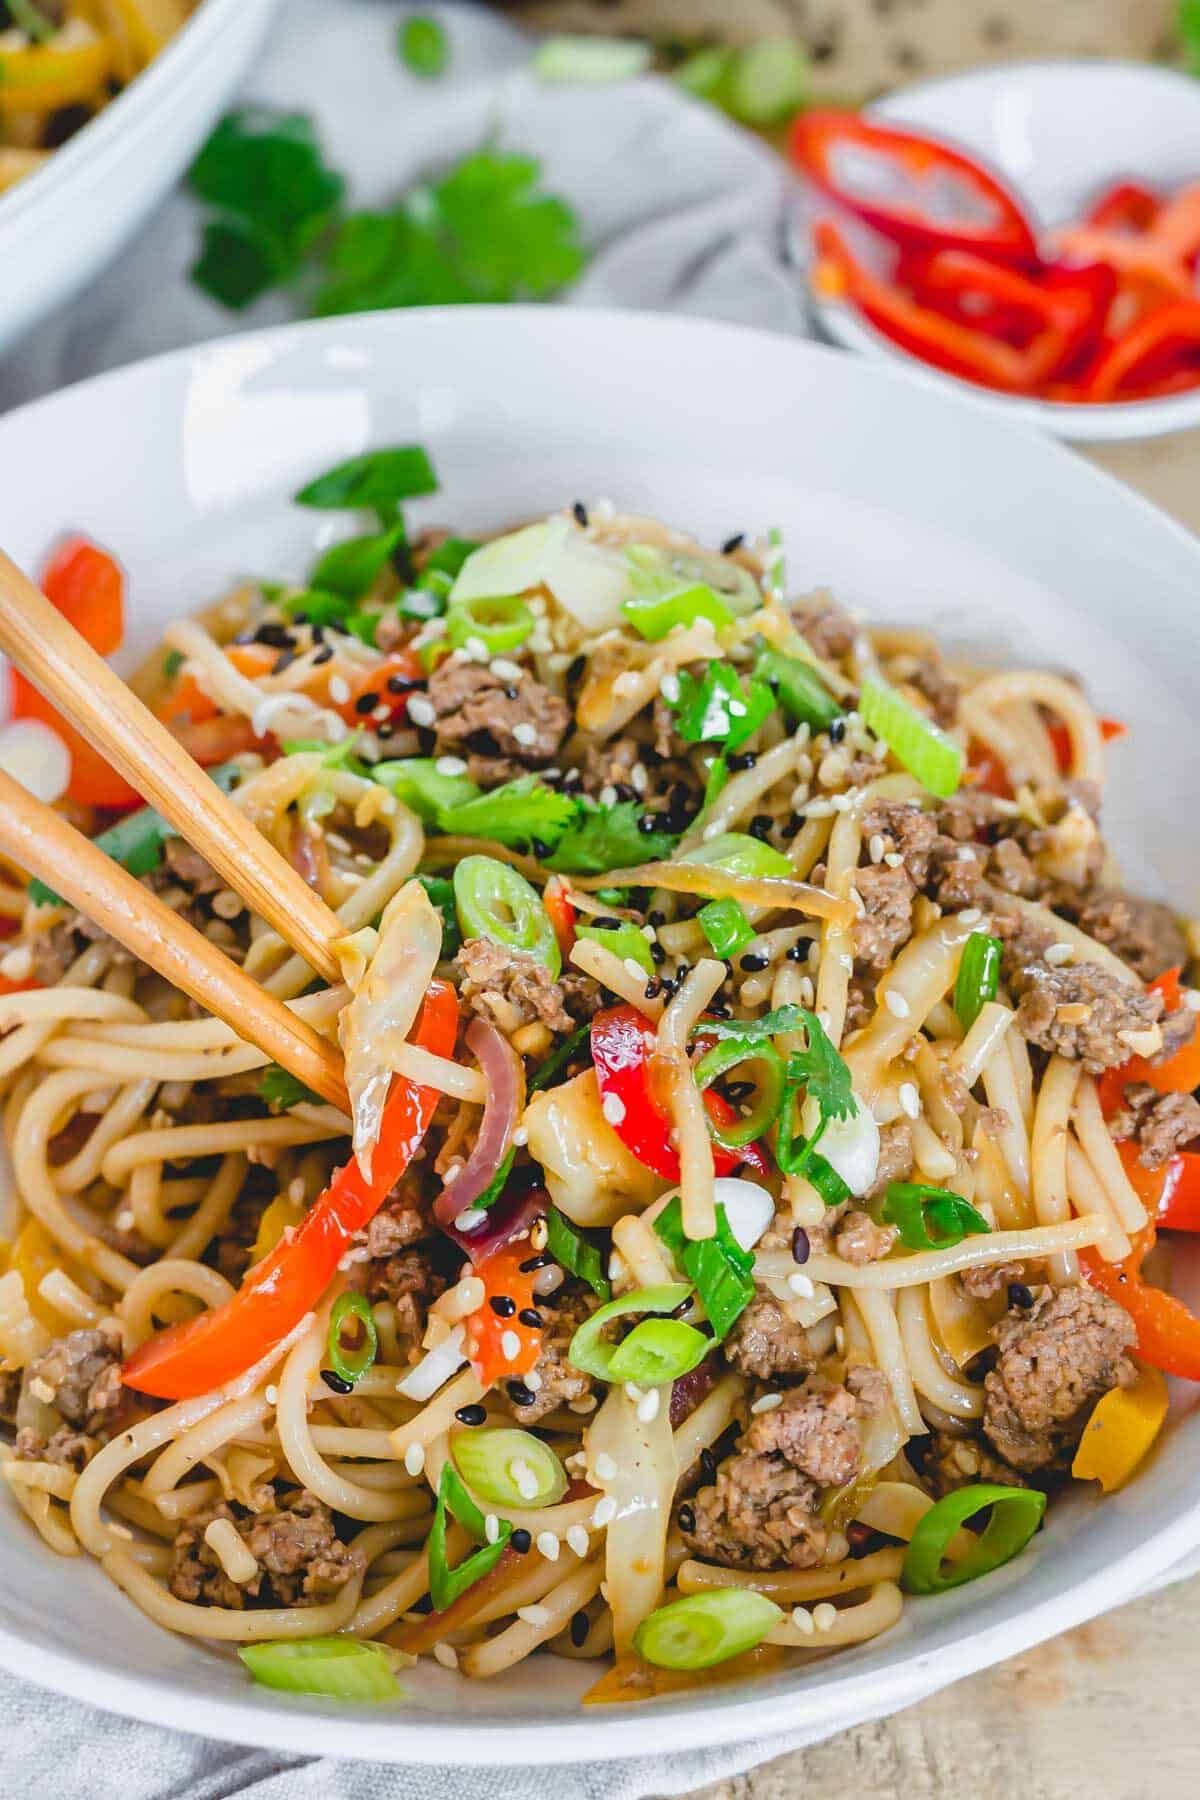 Spicy udon noodles with beef and scallions in a white bowl with chopsticks.